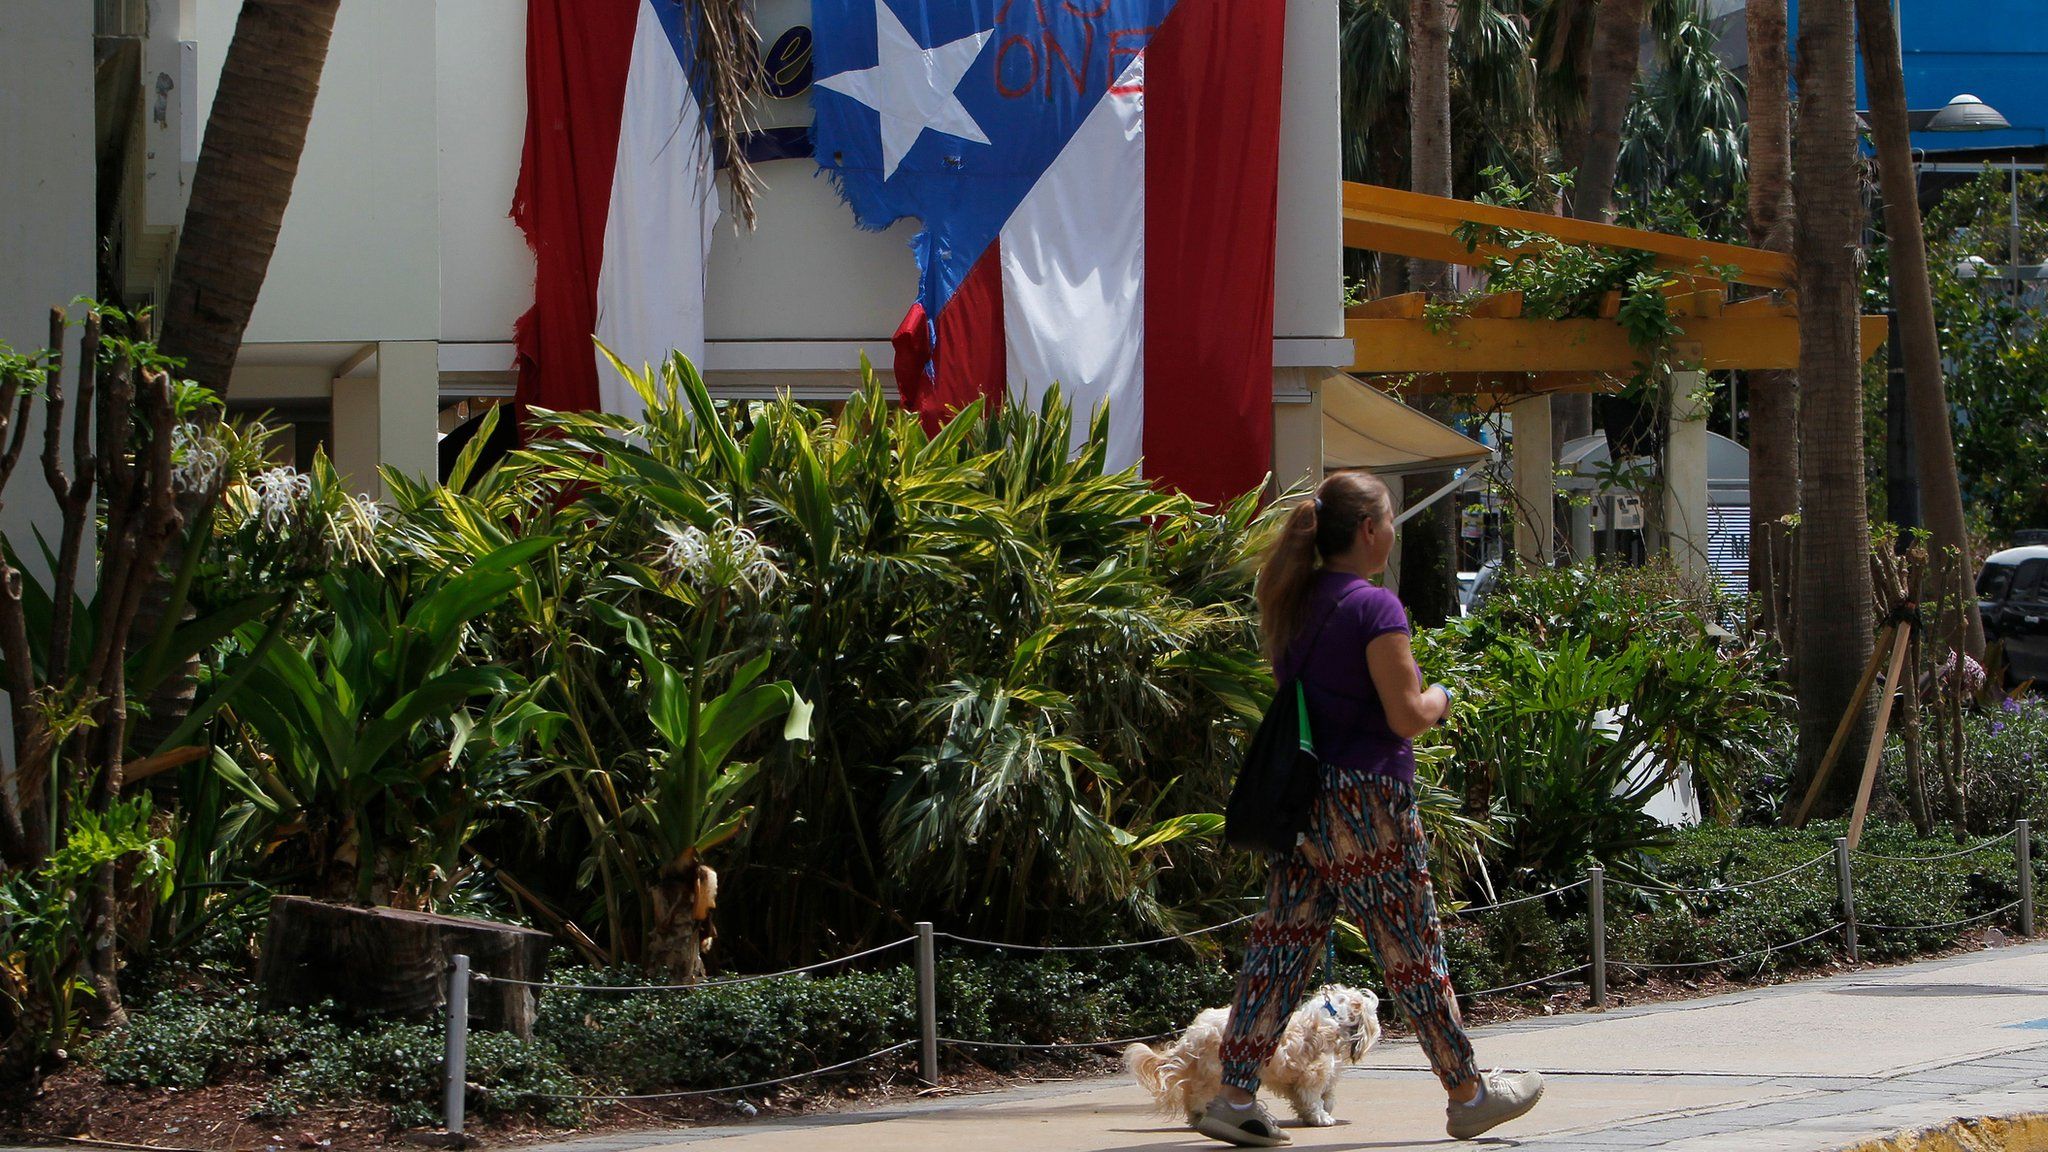 'Together as One' reads on a torn Puerto Rican Flag hanging from a hotel in the tourist zone of el Condado in San Juan, Puerto Rico on October 4, 2017